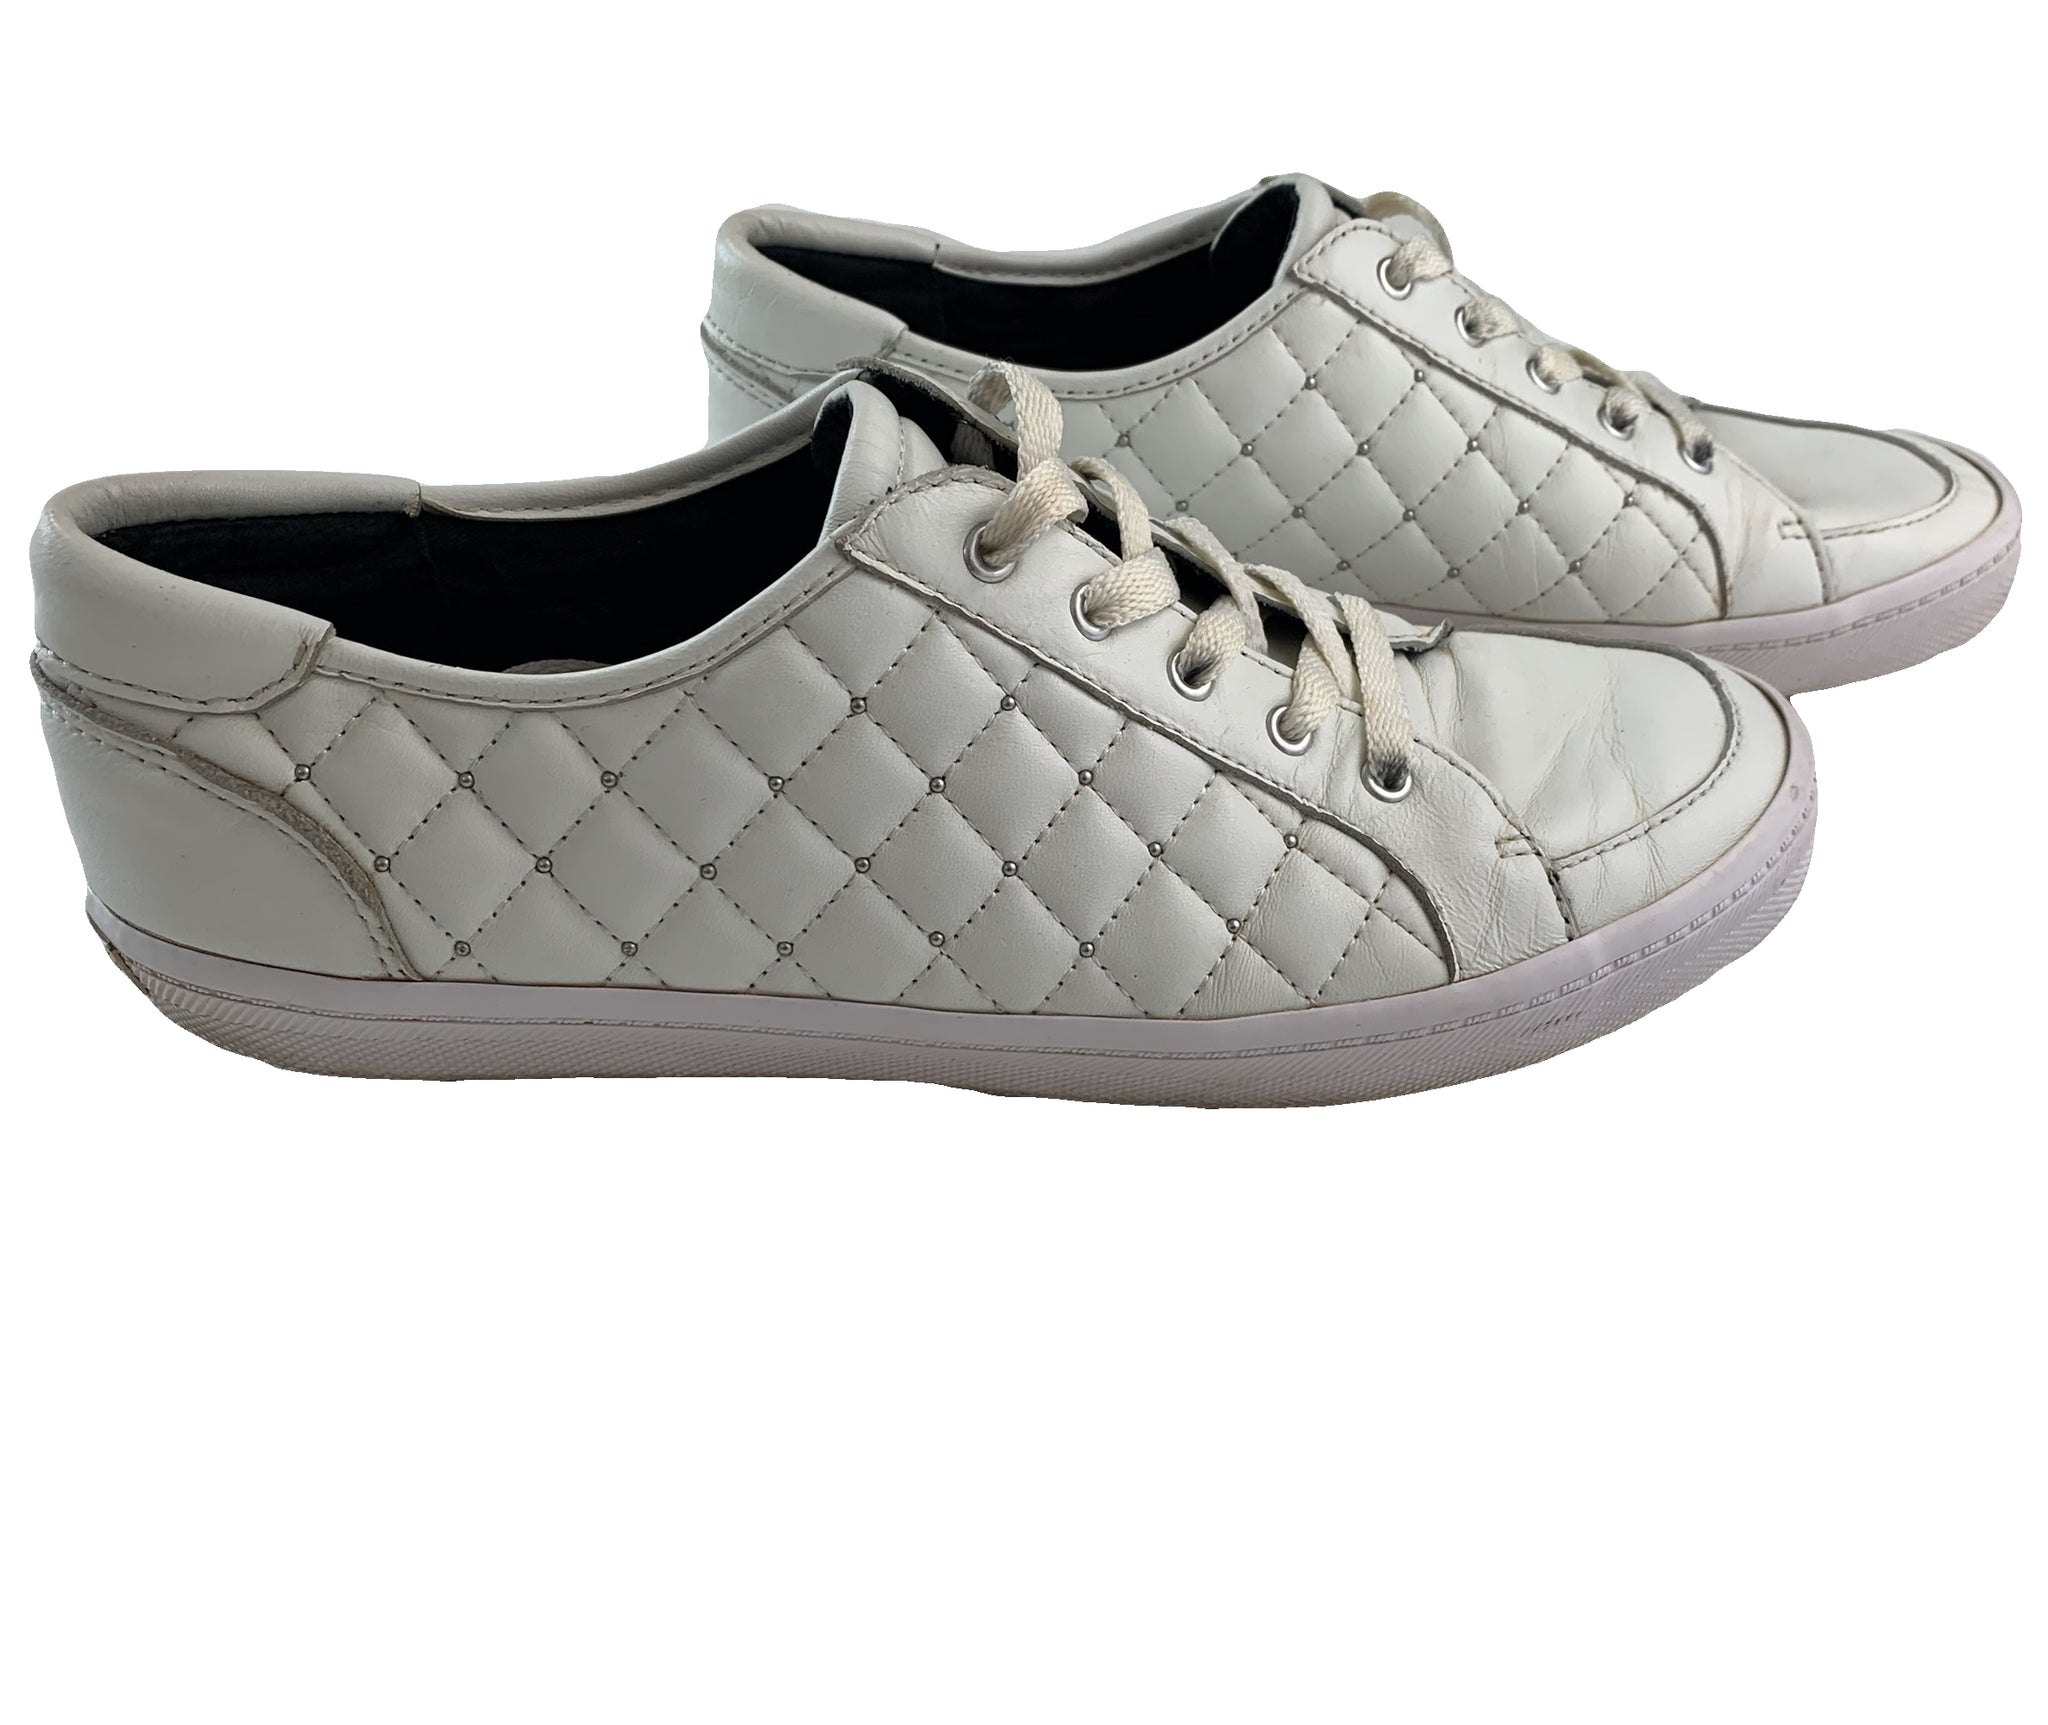 Sander Too Quilted Sneakers Size 9